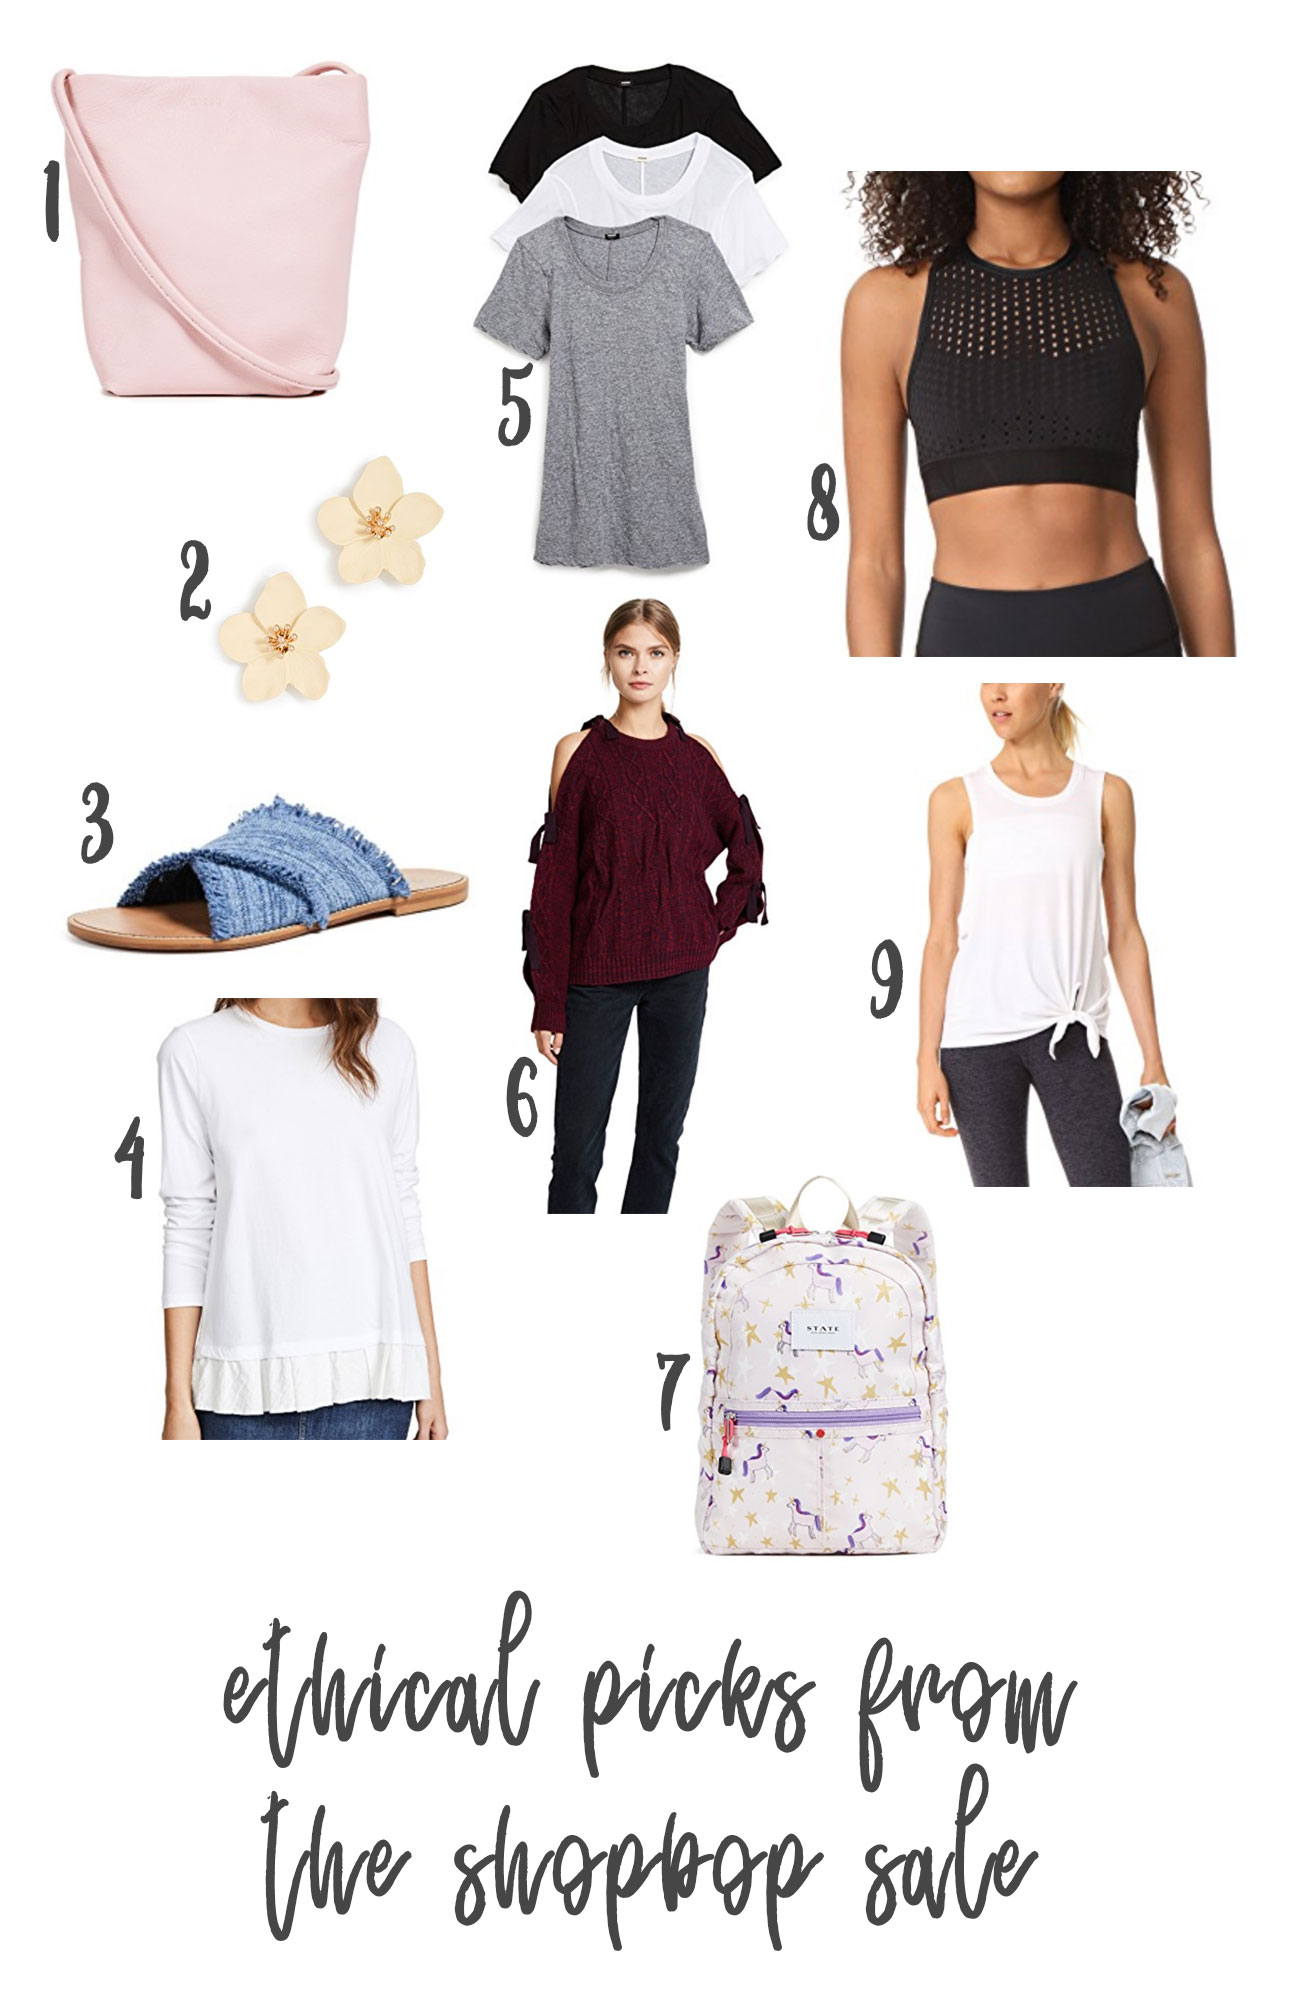 9 of My Favorite Ethical & Made in the USA Picks from the Shopbop Sale by popular North Carolina ethical fashion blogger Still Being Molly